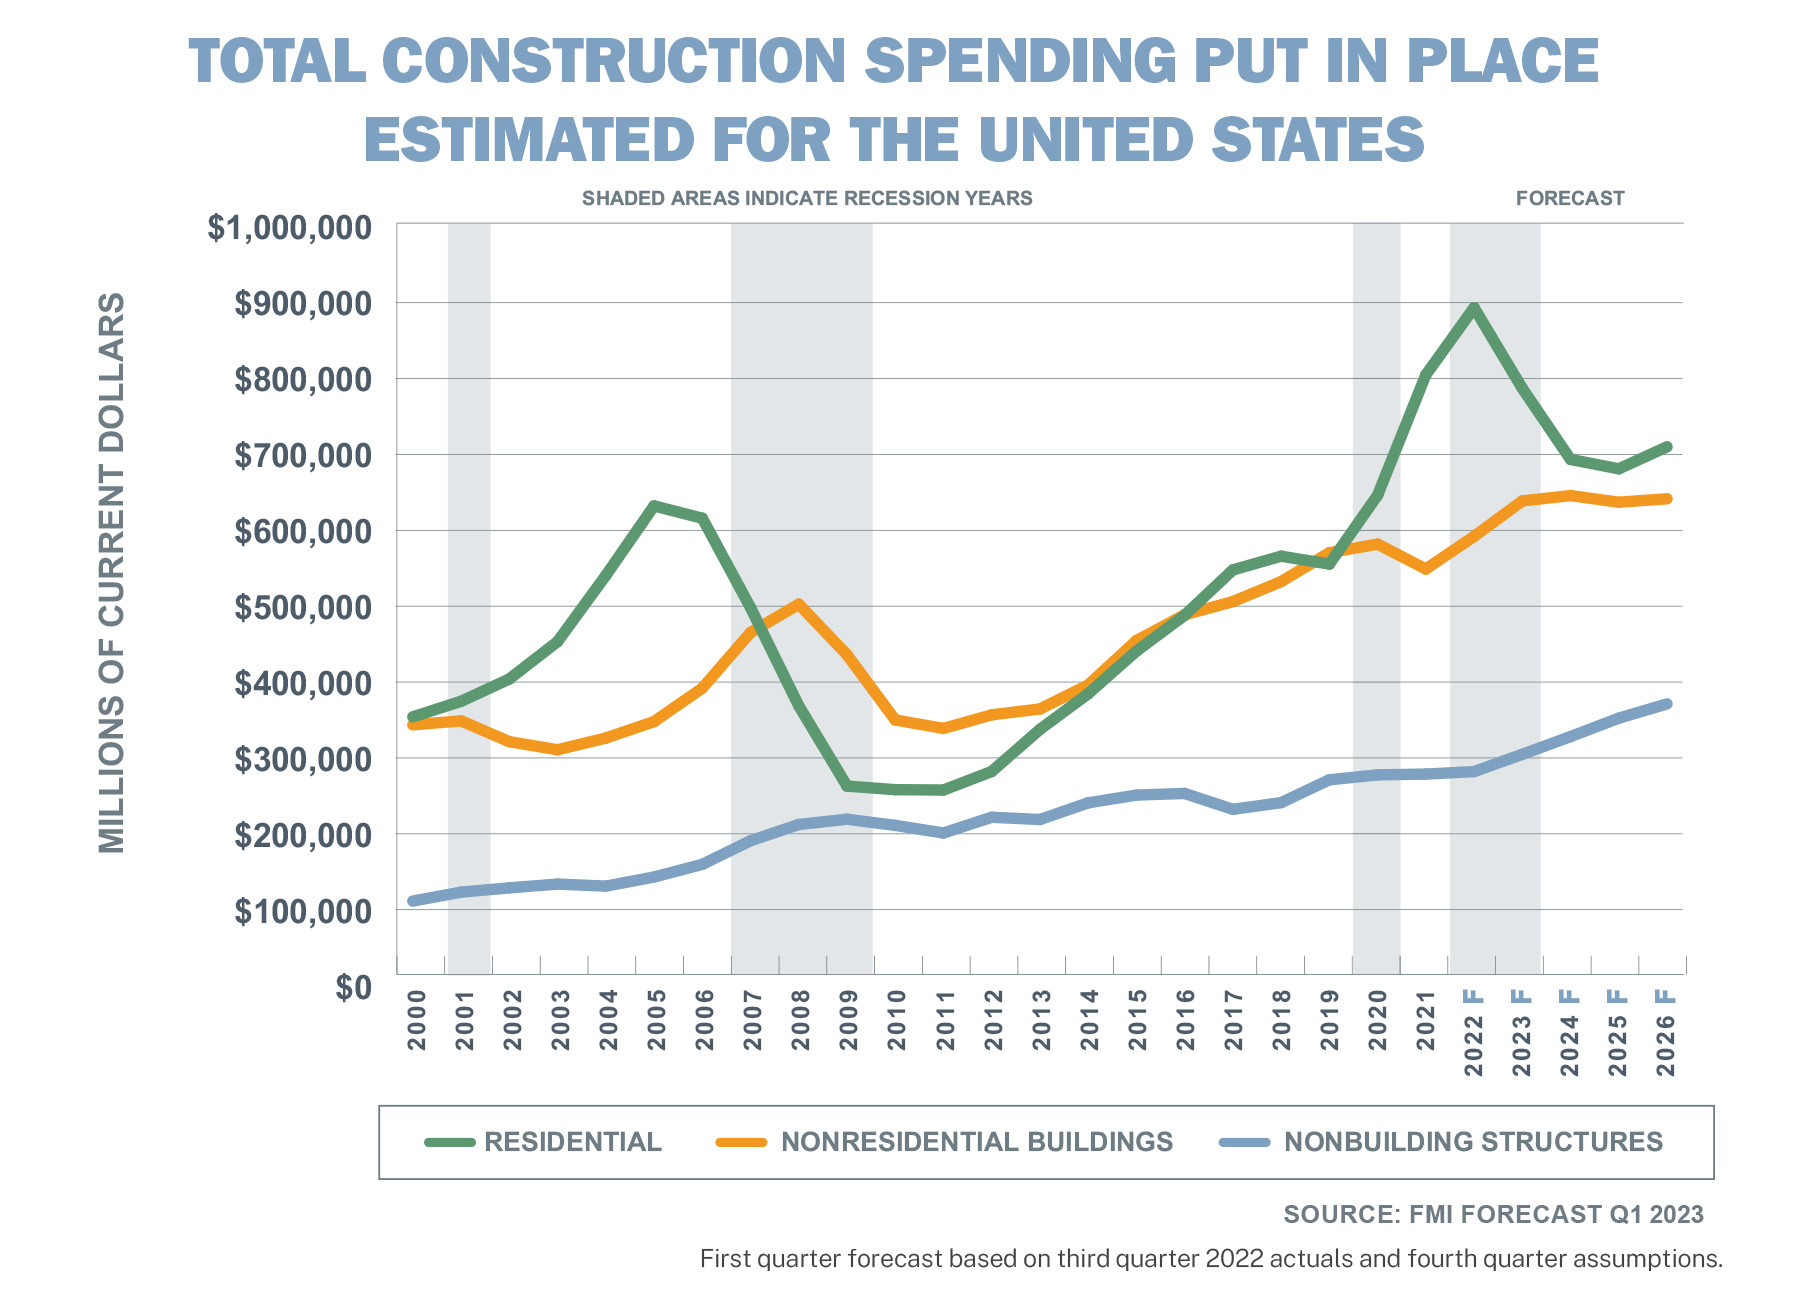 Image shows a graph that depicts the millions of dollars spent and projected in construction spending from 2000 to 2026. 